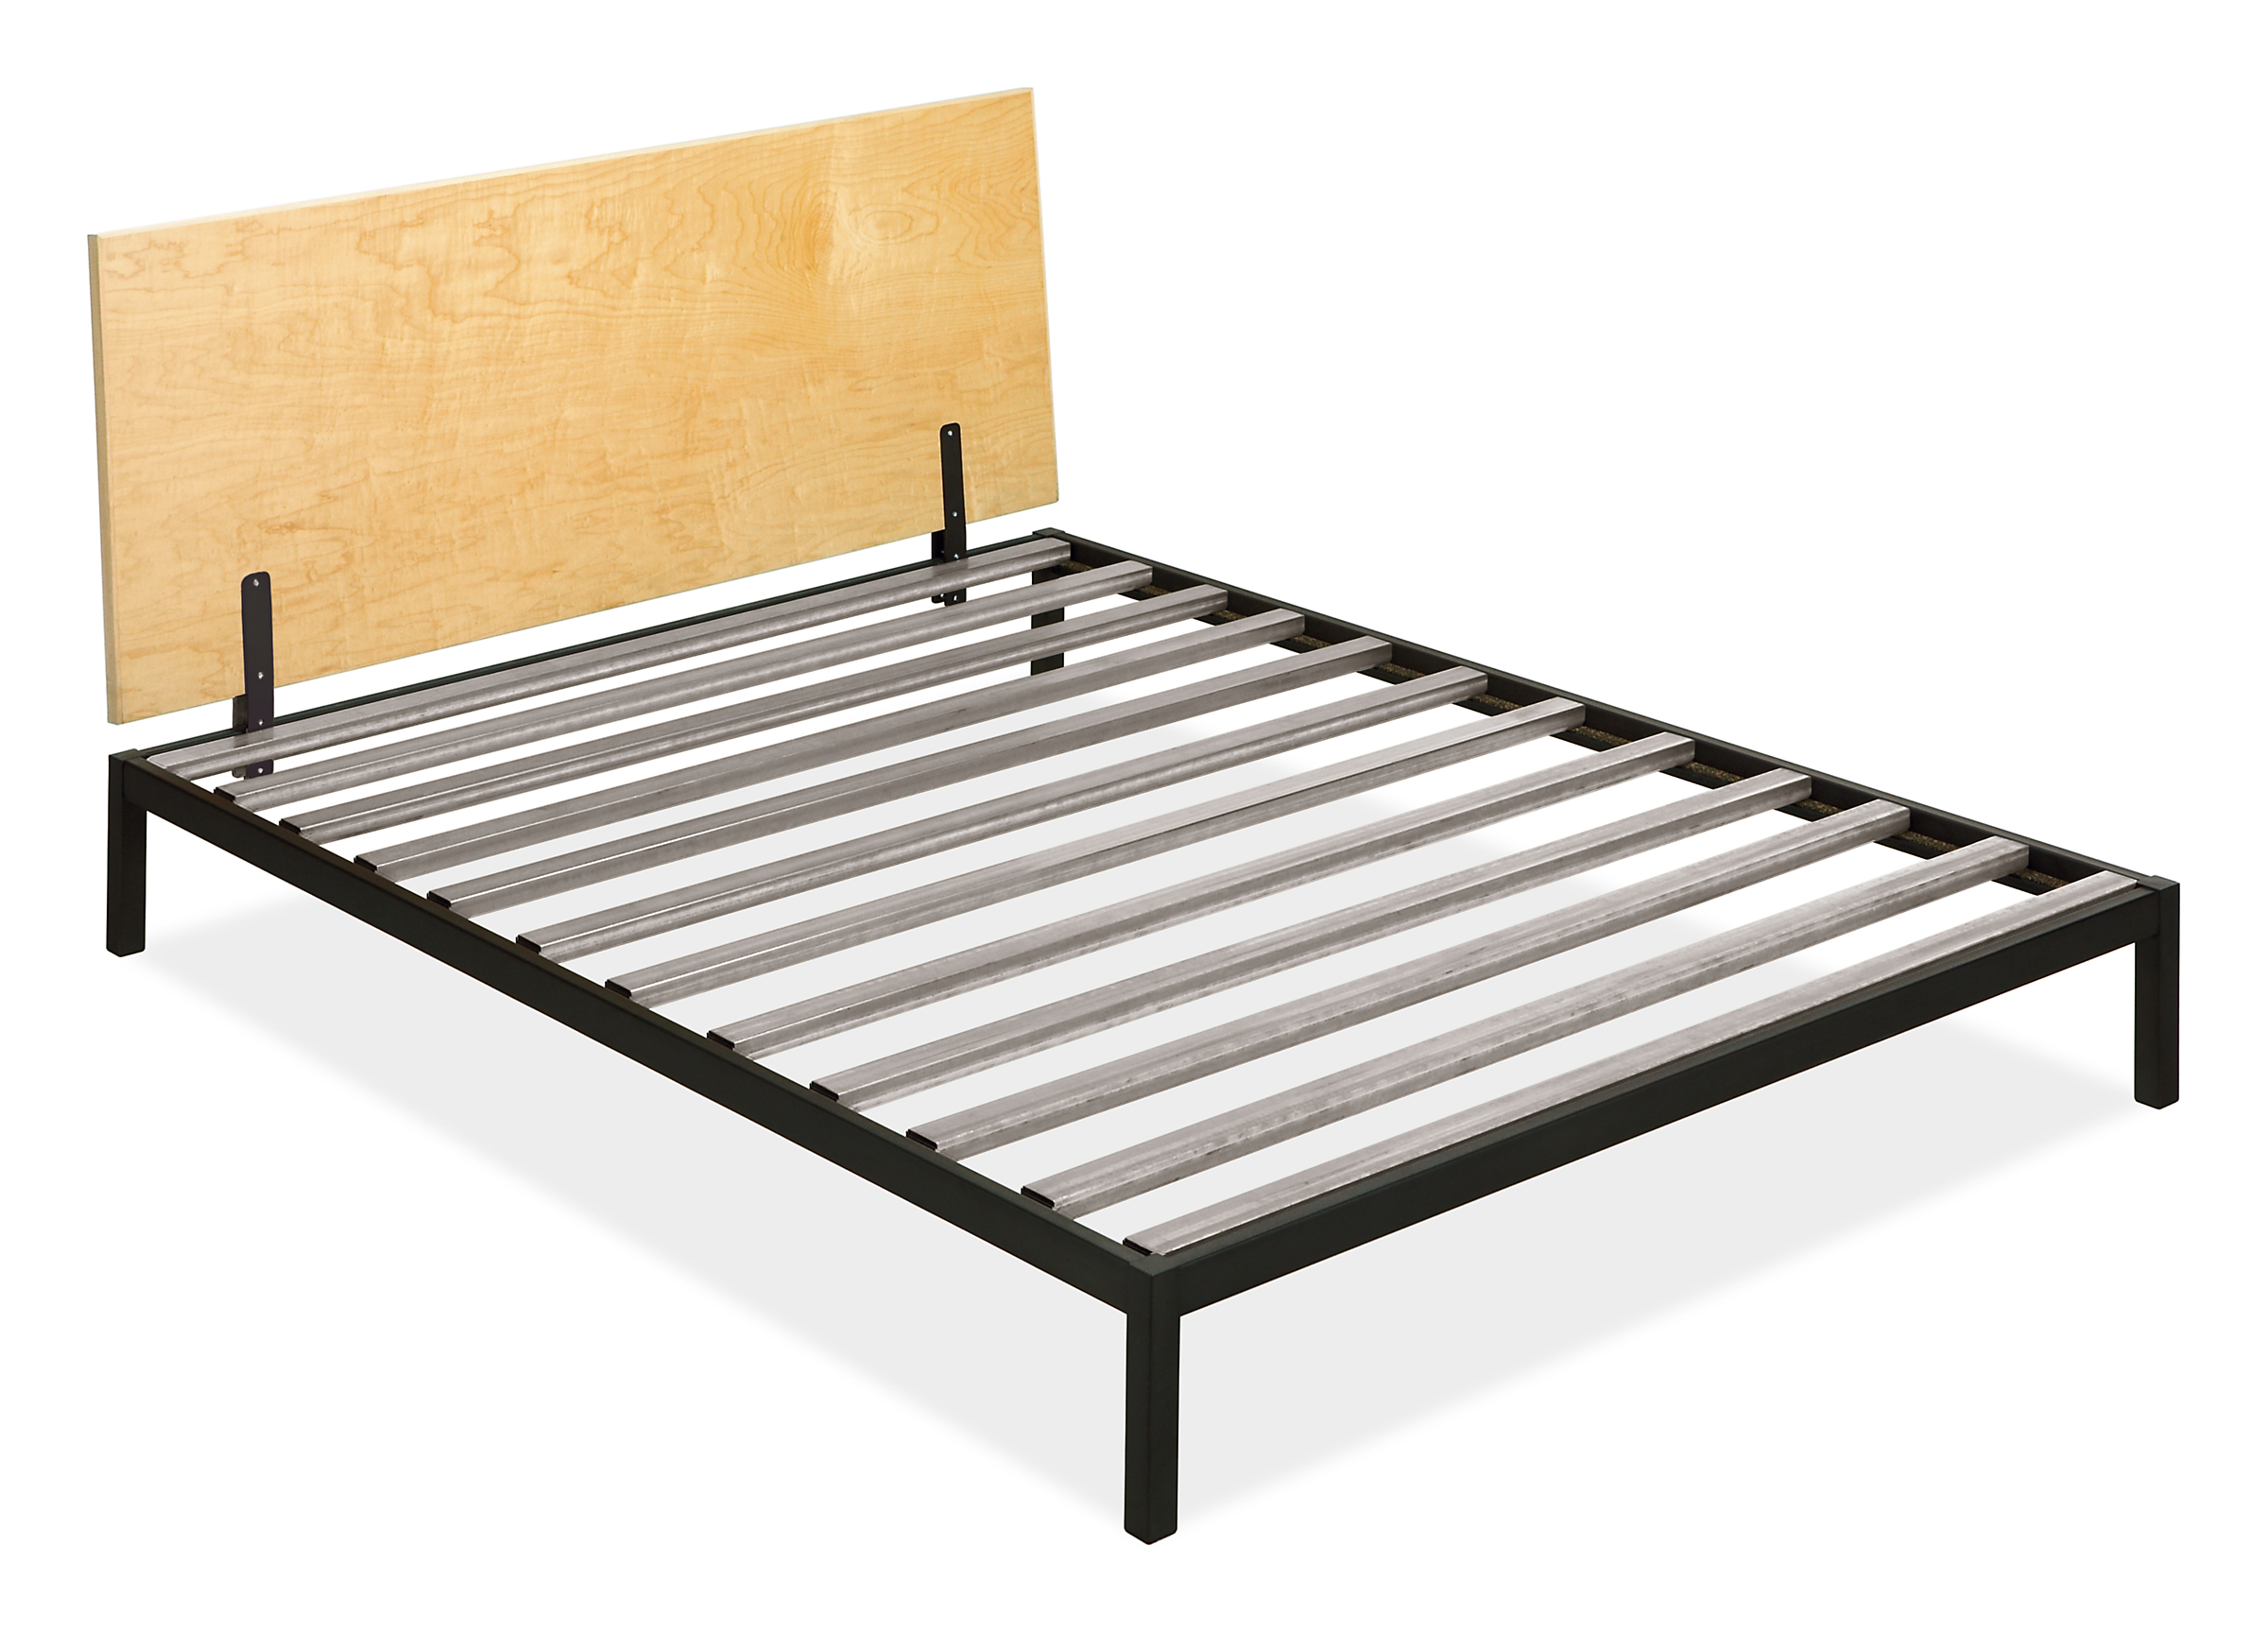 Detail of bed frame without mattress.